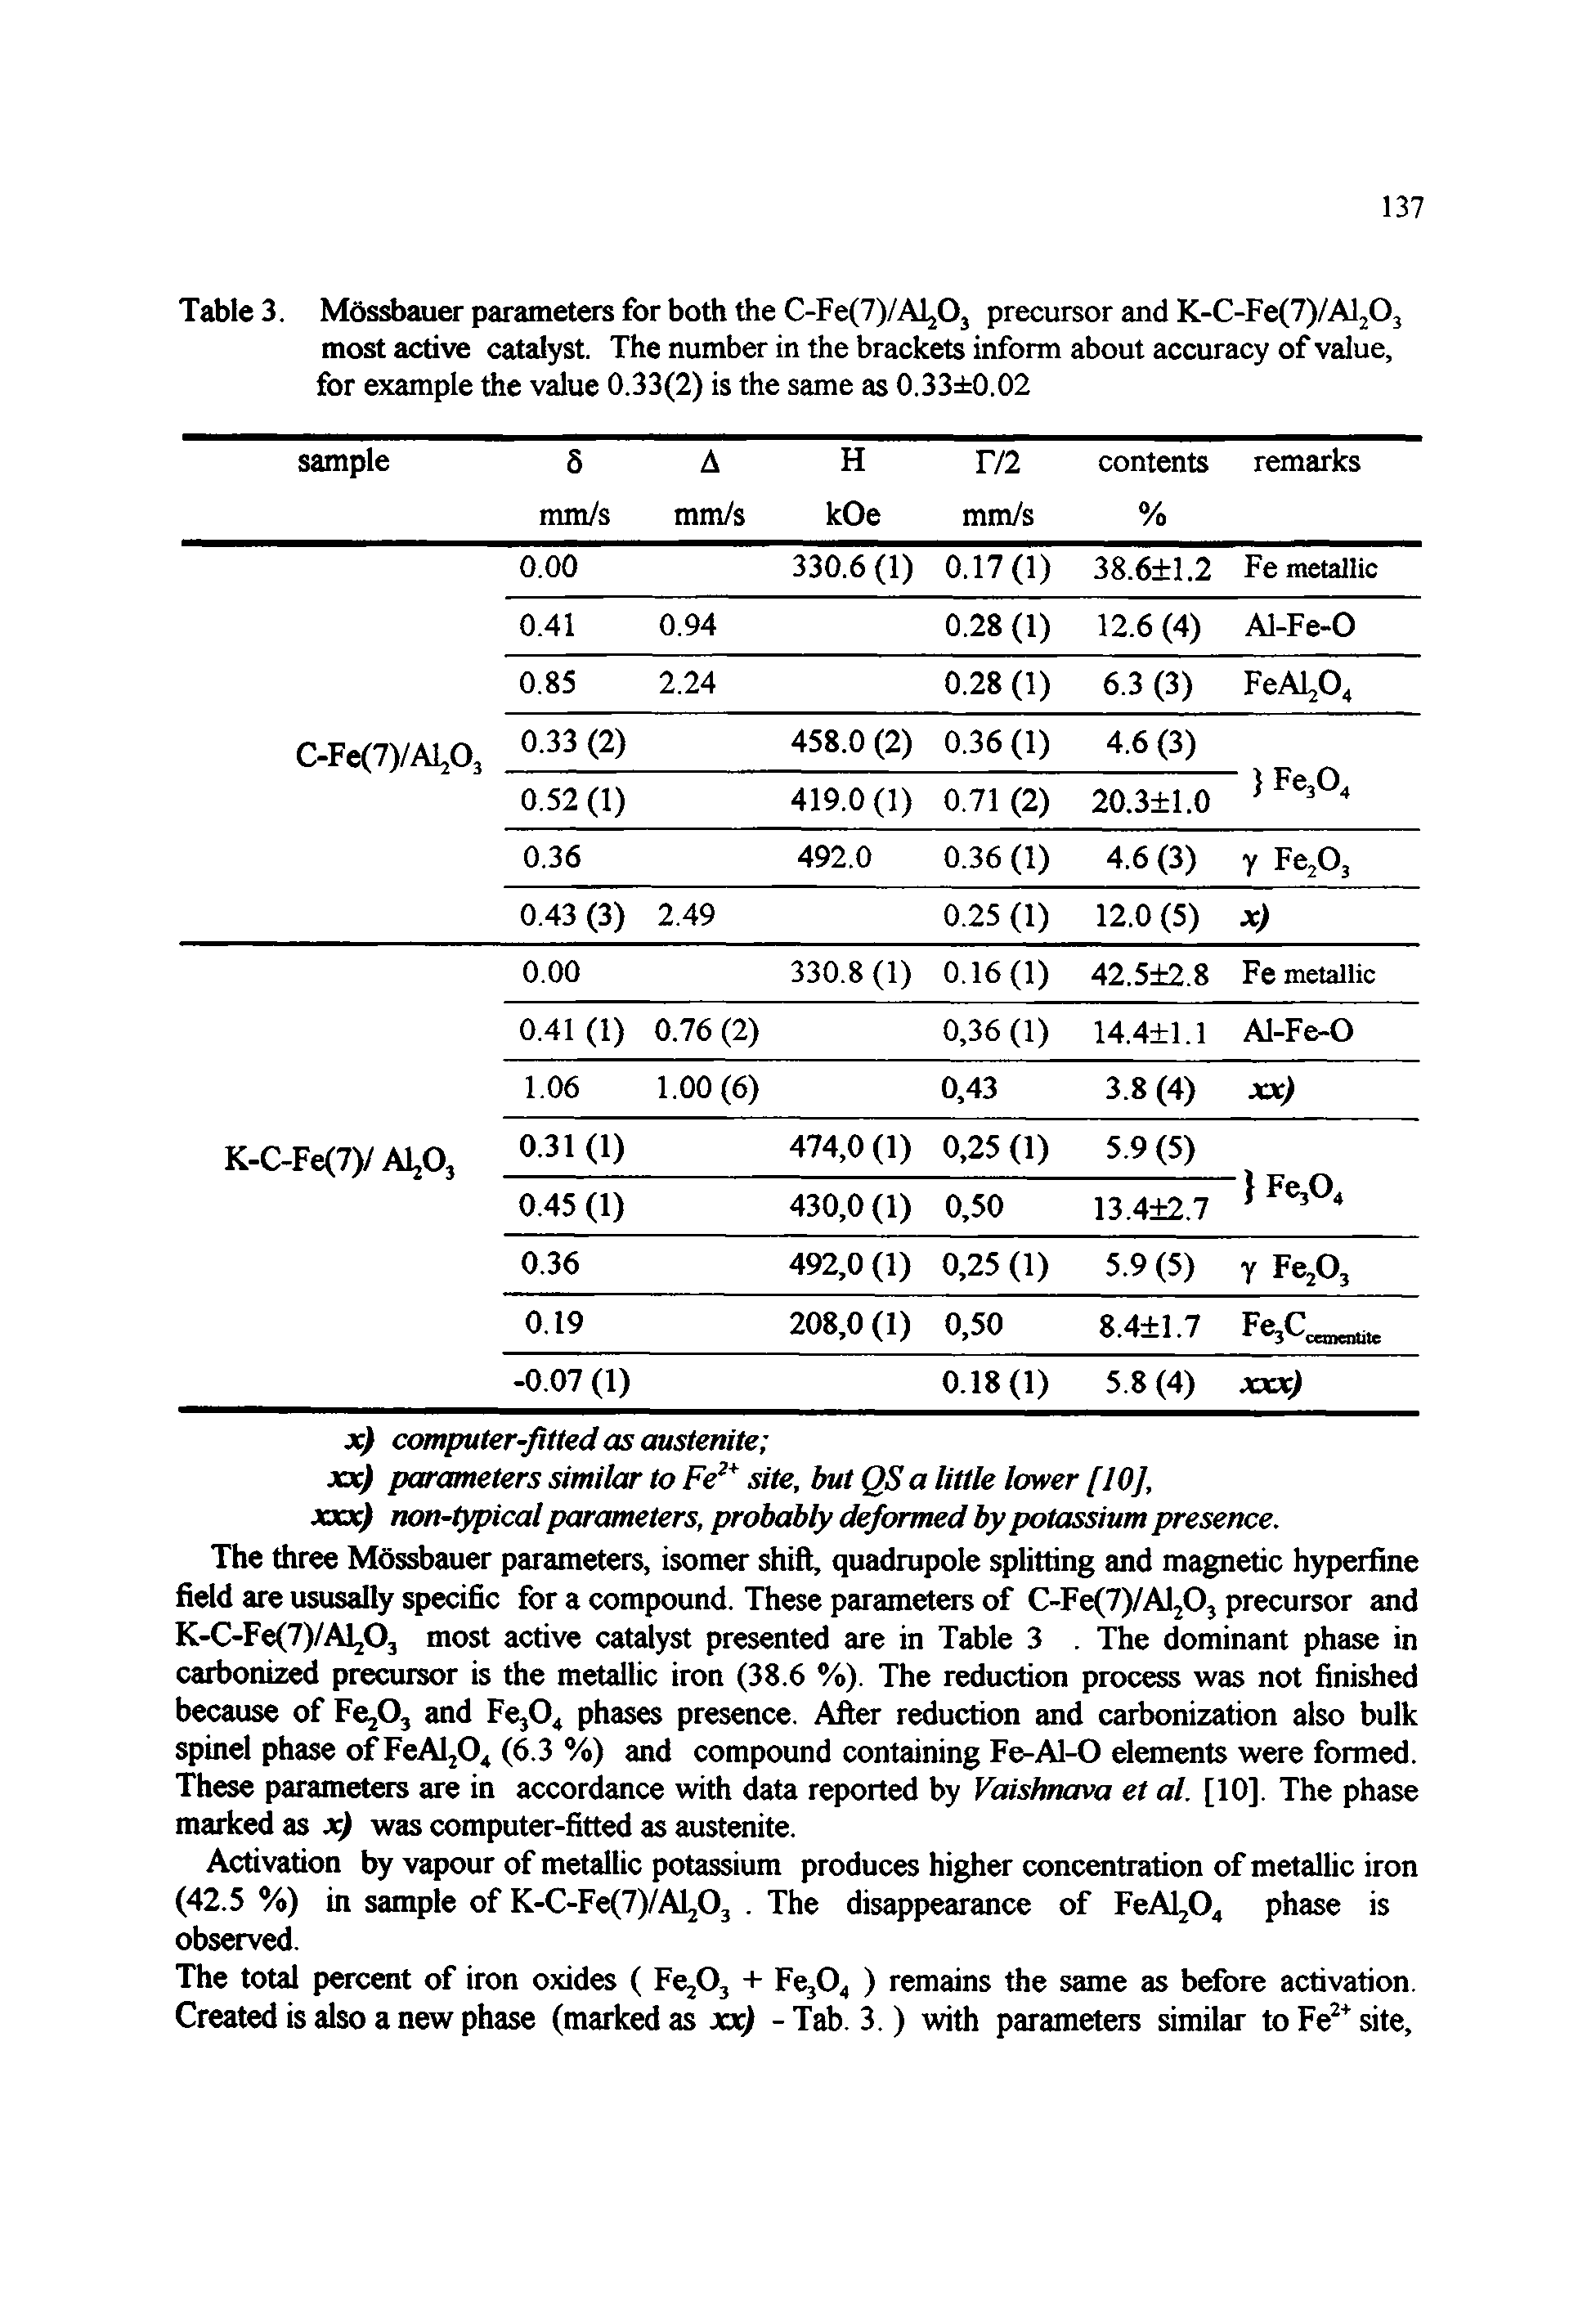 Table 3. Mdssbauer parameters for both the C-Fe(7)/Alj03 precursor and K-C-Fe(7)/Alj03 most active catalyst. The number in the brackets inform about accuracy of value, for example the value 0.33(2) is the same as 0.33 0.02...